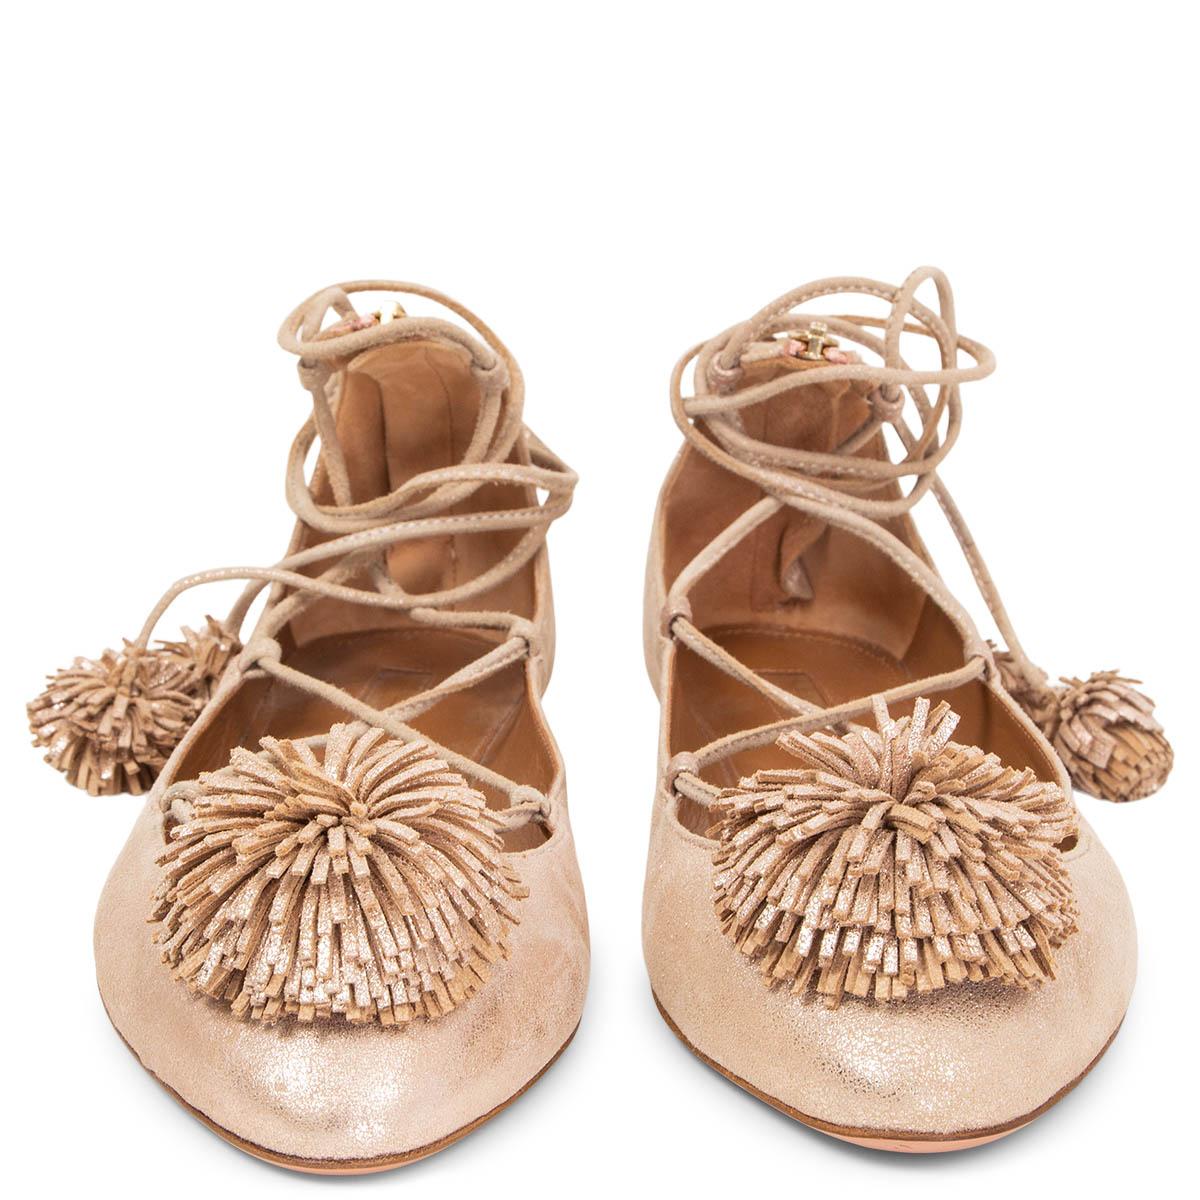 100% authentic Aquazzura Sunshine lace-up ballet flats in nude metallic leather detailed with pom-pom trims. Ghillie tie with back zipper closure. Have been worn once and are in virtually new condition. 

Measurements
Imprinted Size	40
Shoe